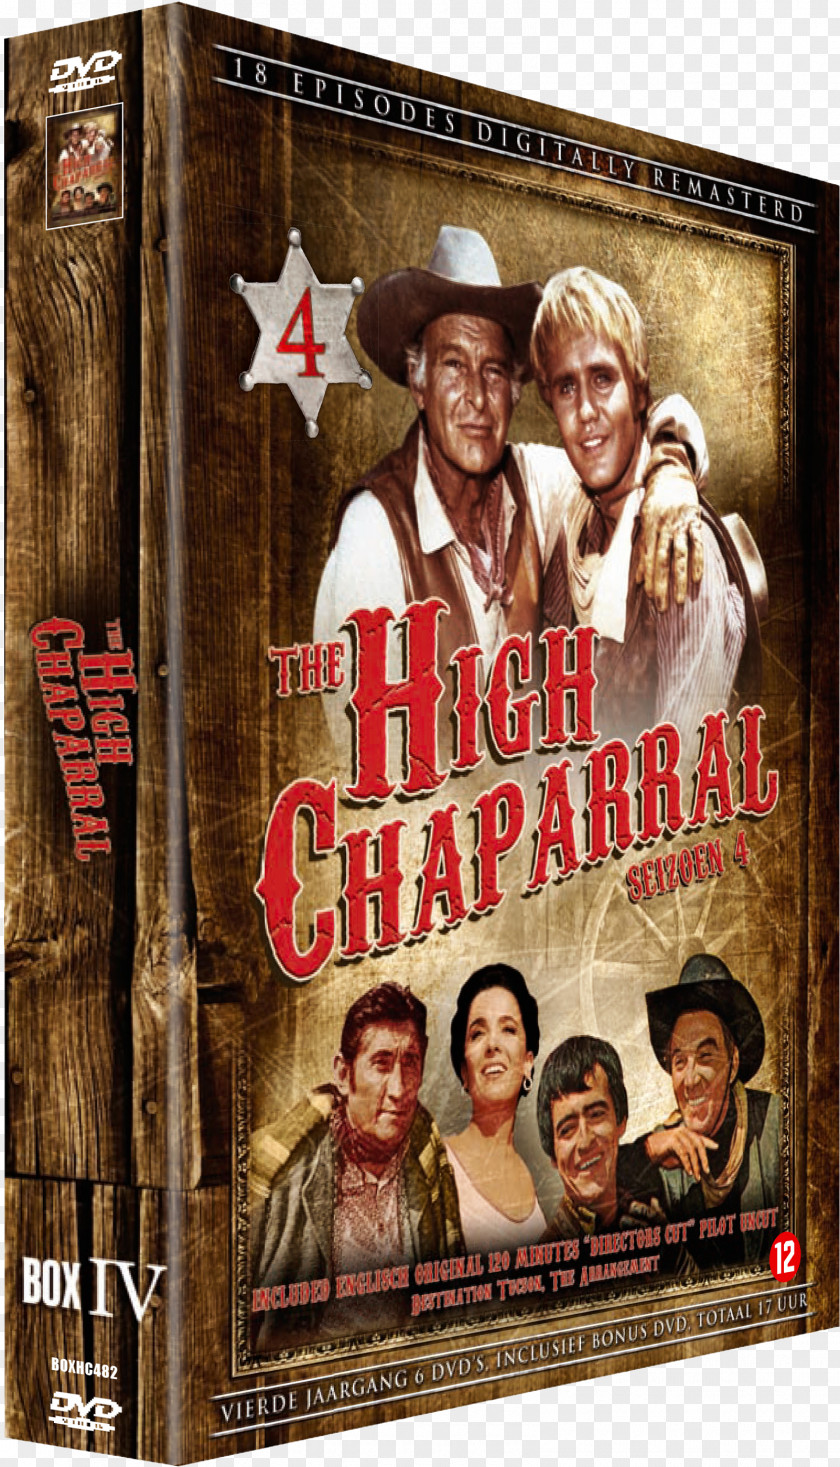 Dvd The High Chaparral DVD Film Episode Box 3 PNG